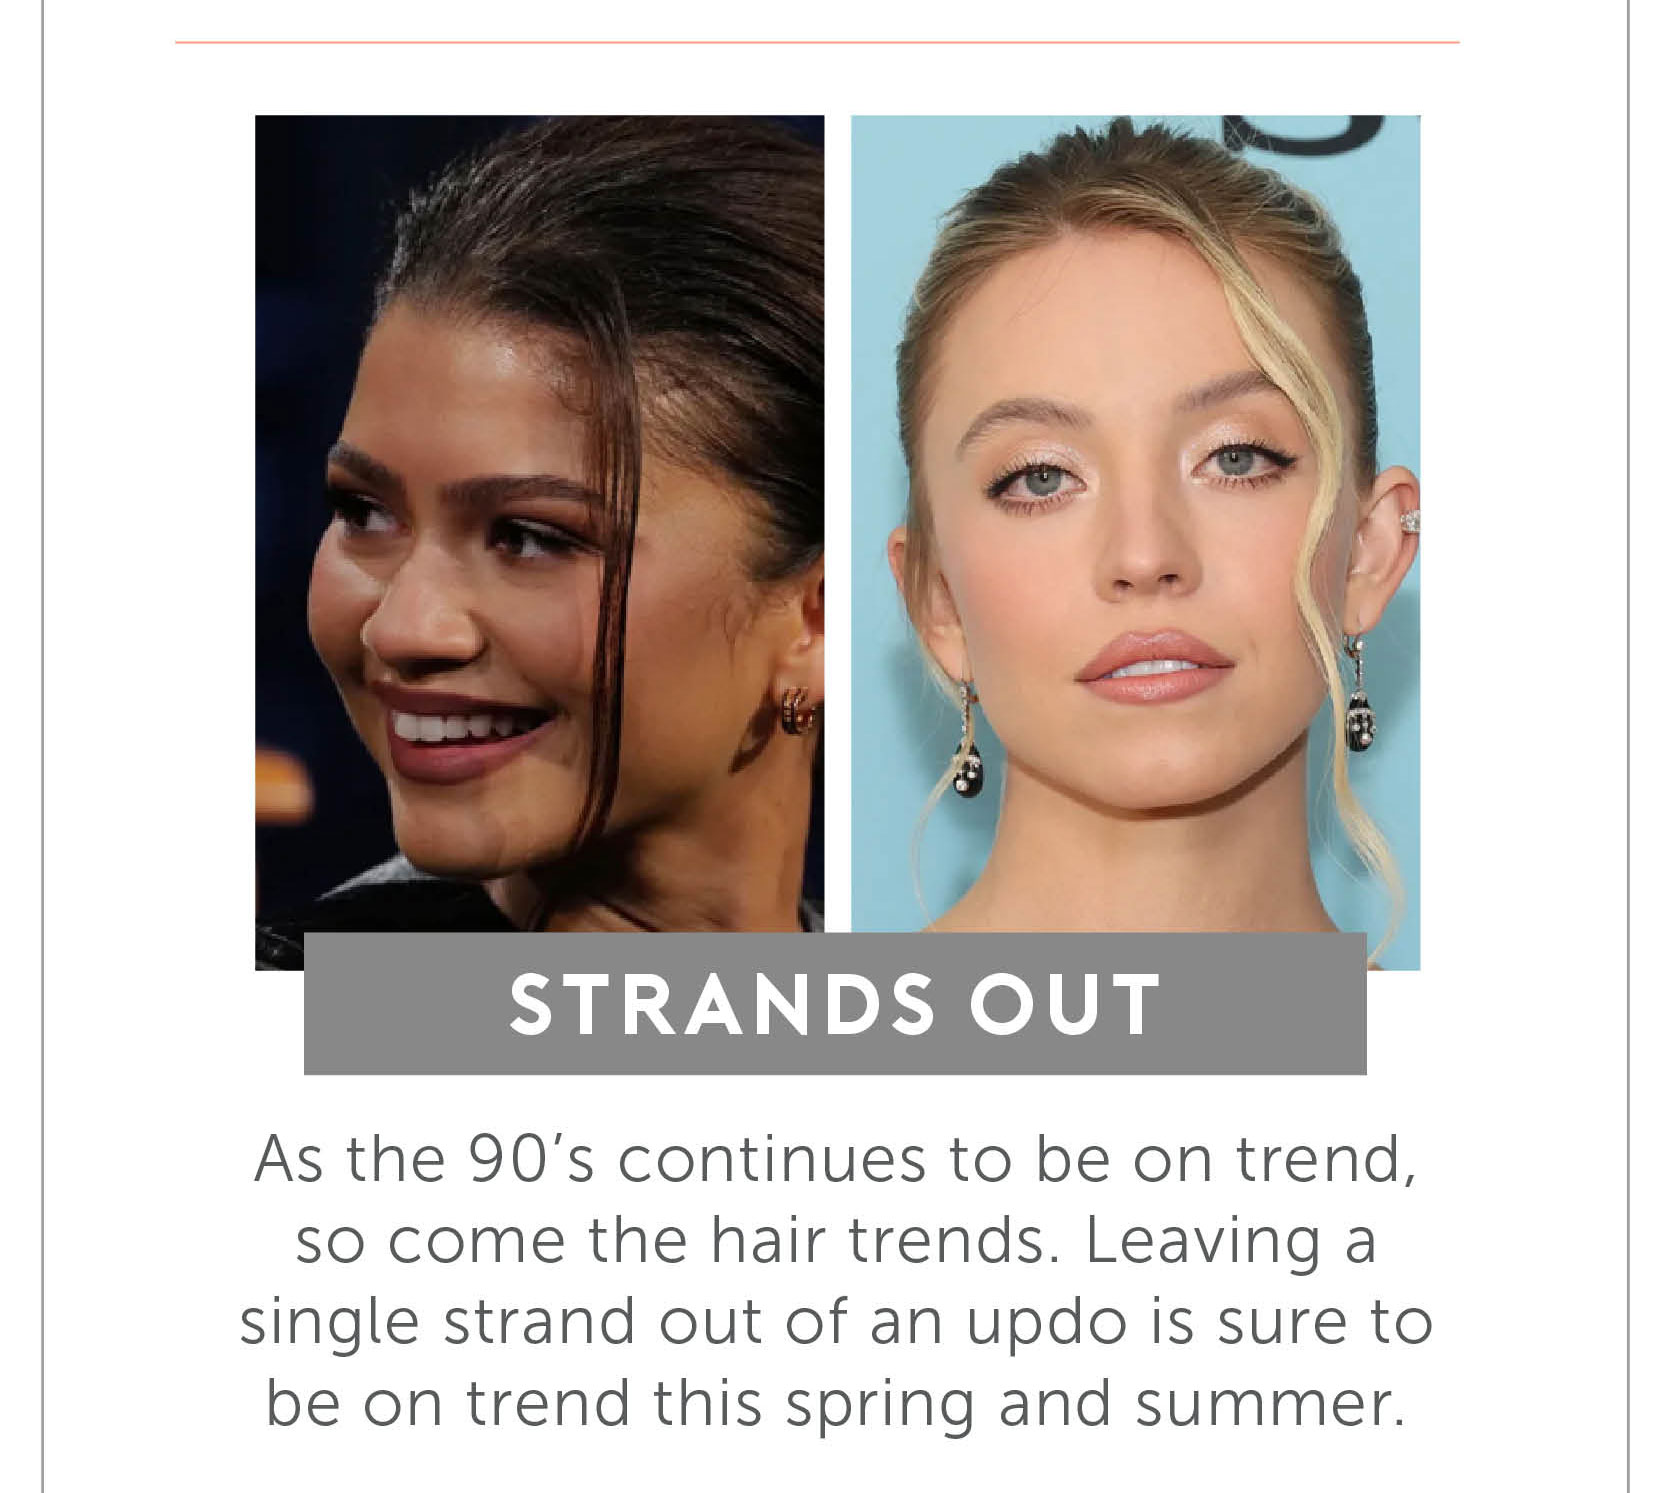 Strands Out - As the 90’s continues to be on trend, so come the hair trends. Leaving a single strand out of an updo is sure to be on trend this spring and summer.